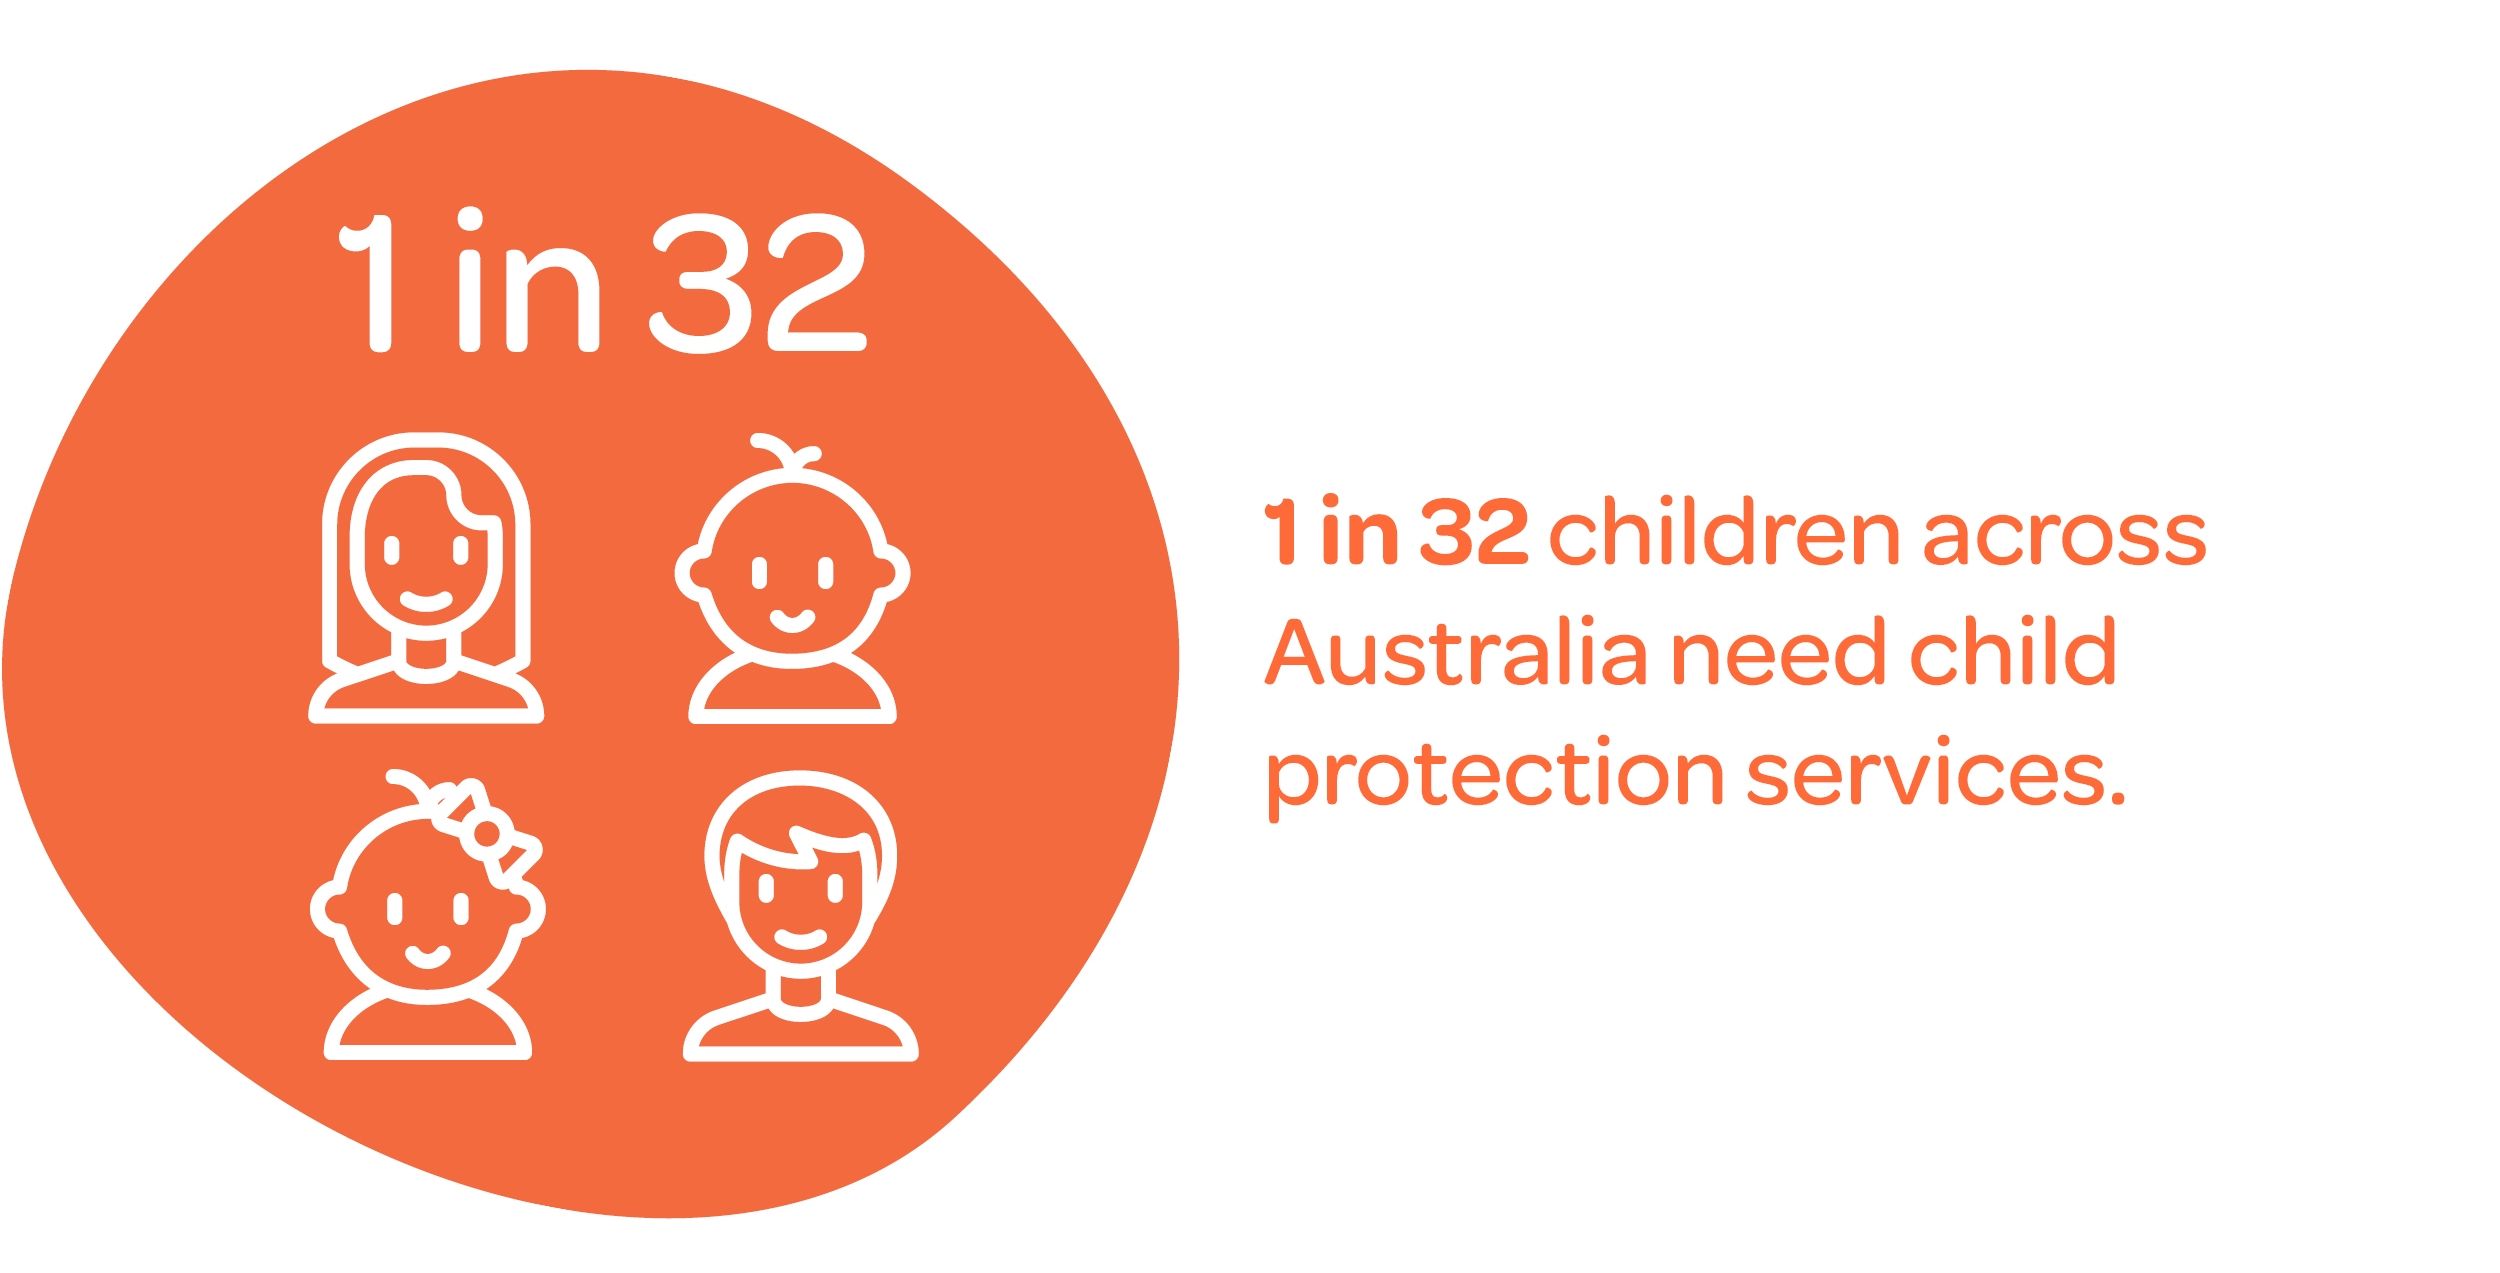 1 in 32 children across Australia need child protection services